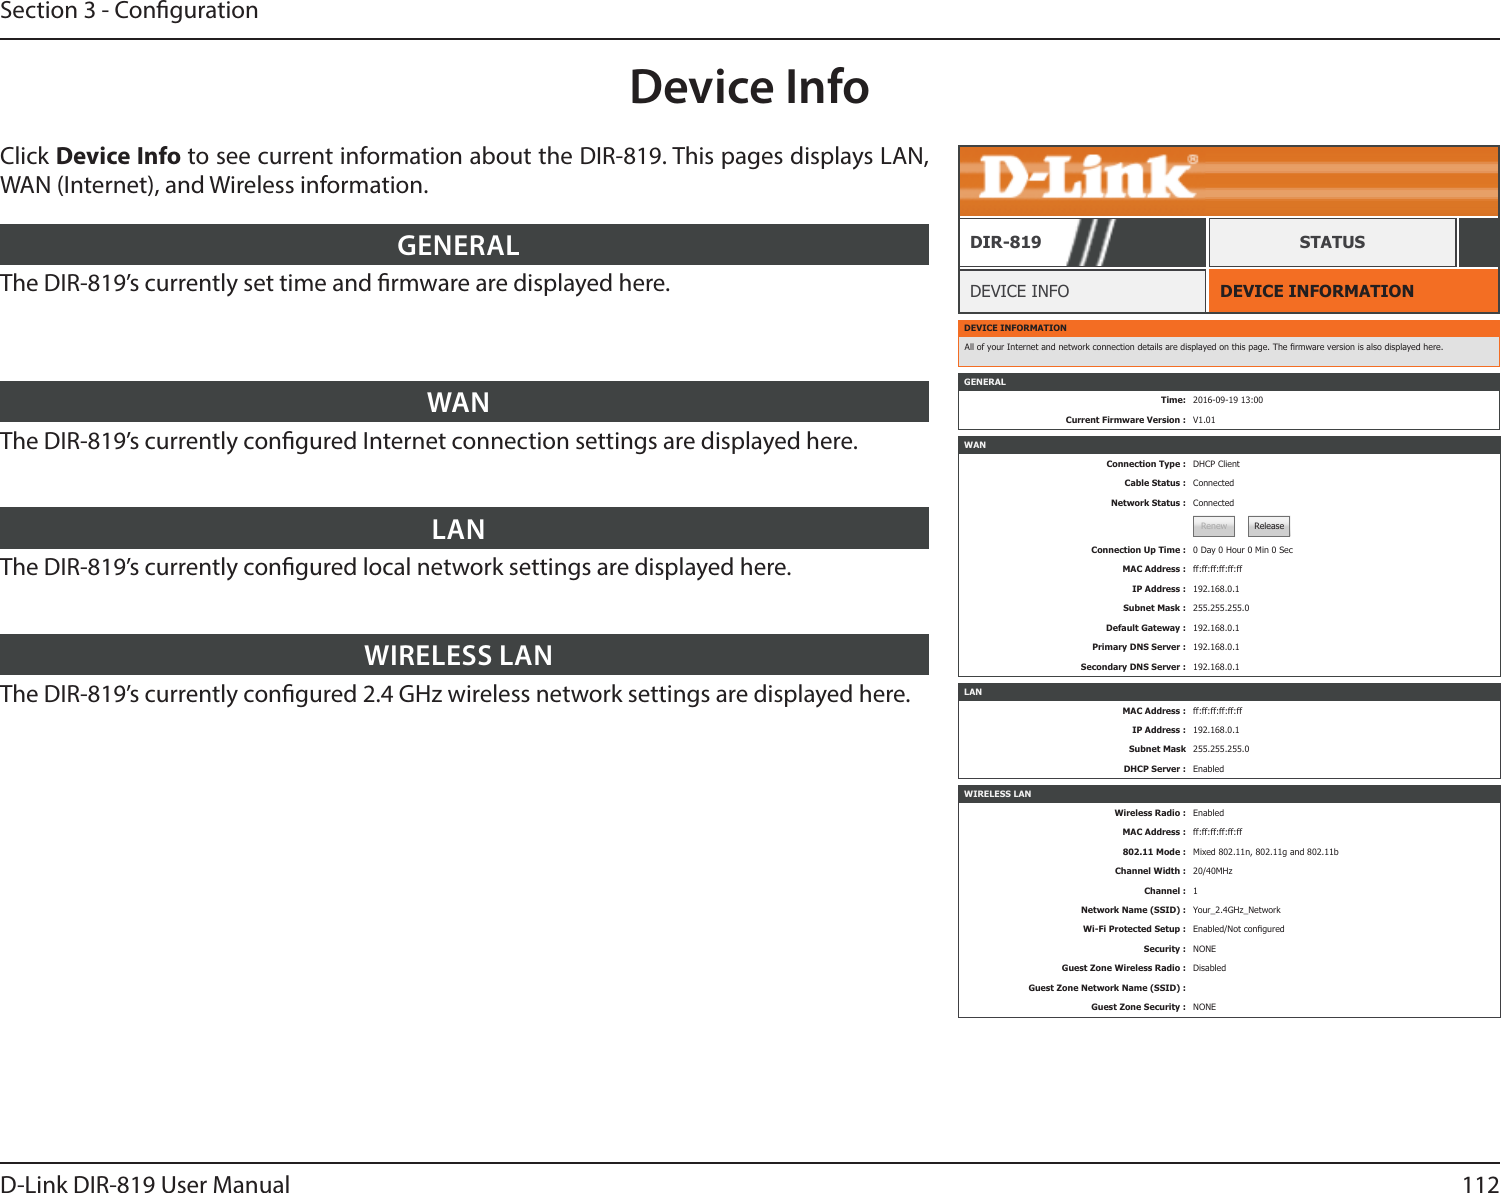 112D-Link DIR-819 User ManualSection 3 - CongurationDevice InfoDEVICE INFORMATIONDEVICE INFODIR-819 STATUSClick Device Info to see current information about the DIR-819. This pages displays LAN, WAN (Internet), and Wireless information.The DIR-819’s currently set time and rmware are displayed here.GENERALThe DIR-819’s currently congured Internet connection settings are displayed here.WANThe DIR-819’s currently congured local network settings are displayed here.LANThe DIR-819’s currently congured 2.4 GHz wireless network settings are displayed here.WIRELESS LANDEVICE INFORMATIONAll of your Internet and network connection details are displayed on this page. The rmware version is also displayed here.WANConnection Type : DHCP ClientCable Status : ConnectedNetwork Status : ConnectedRenew ReleaseConnection Up Time : 0 Day 0 Hour 0 Min 0 SecMAC Address : ff:ff:ff:ff:ff:ffIP Address : 192.168.0.1Subnet Mask : 255.255.255.0Default Gateway : 192.168.0.1Primary DNS Server : 192.168.0.1Secondary DNS Server : 192.168.0.1LANMAC Address : ff:ff:ff:ff:ff:ffIP Address : 192.168.0.1Subnet Mask 255.255.255.0DHCP Server : EnabledWIRELESS LANWireless Radio : EnabledMAC Address : ff:ff:ff:ff:ff:ff802.11 Mode : Mixed 802.11n, 802.11g and 802.11bChannel Width : 20/40MHzChannel : 1Network Name (SSID) : Your_2.4GHz_NetworkWi-Fi Protected Setup : Enabled/Not conguredSecurity : NONEGuest Zone Wireless Radio : DisabledGuest Zone Network Name (SSID) :Guest Zone Security : NONEGENERALTime: 2016-09-19 13:00Current Firmware Version : V1.01